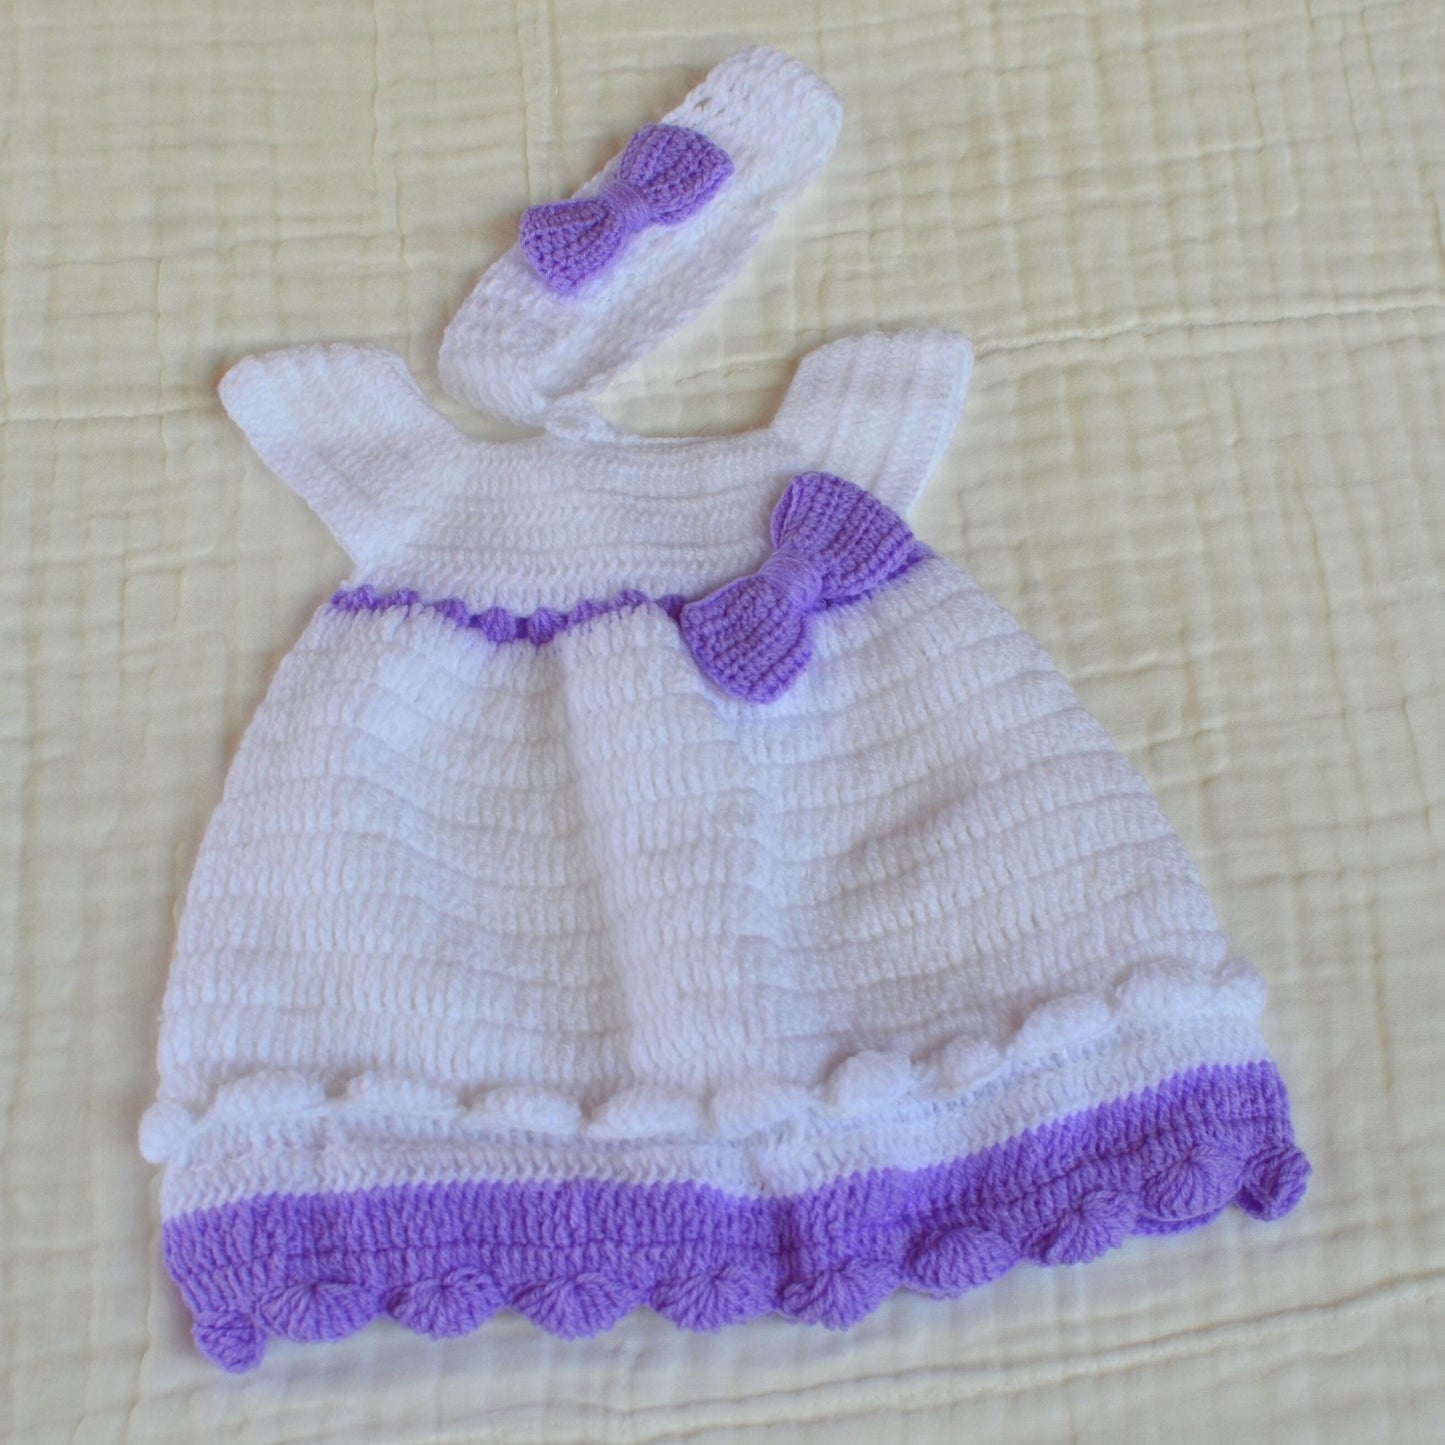 Crochet Baby Dress with Matching Hairband - 3 Month Size